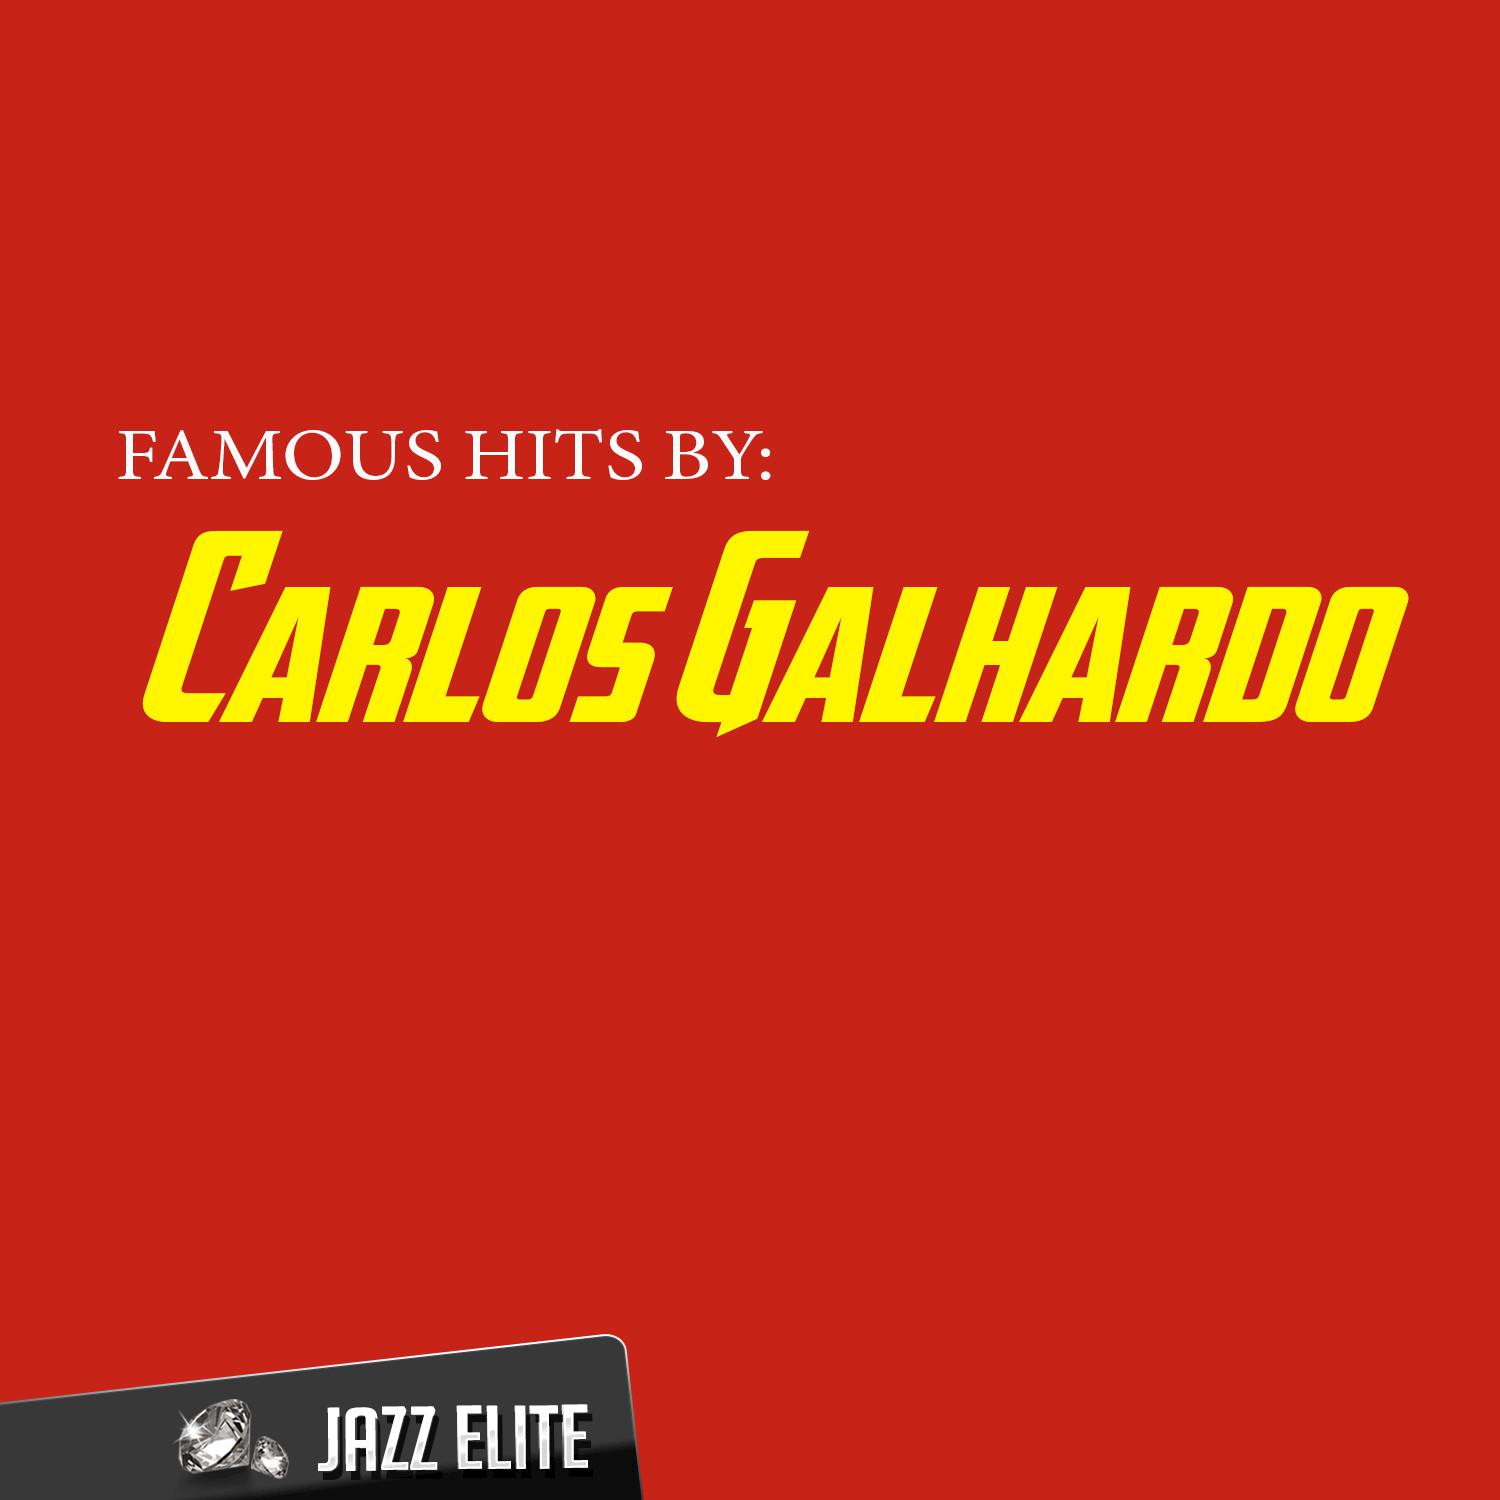 Famous Hits by Carlos Galhardo